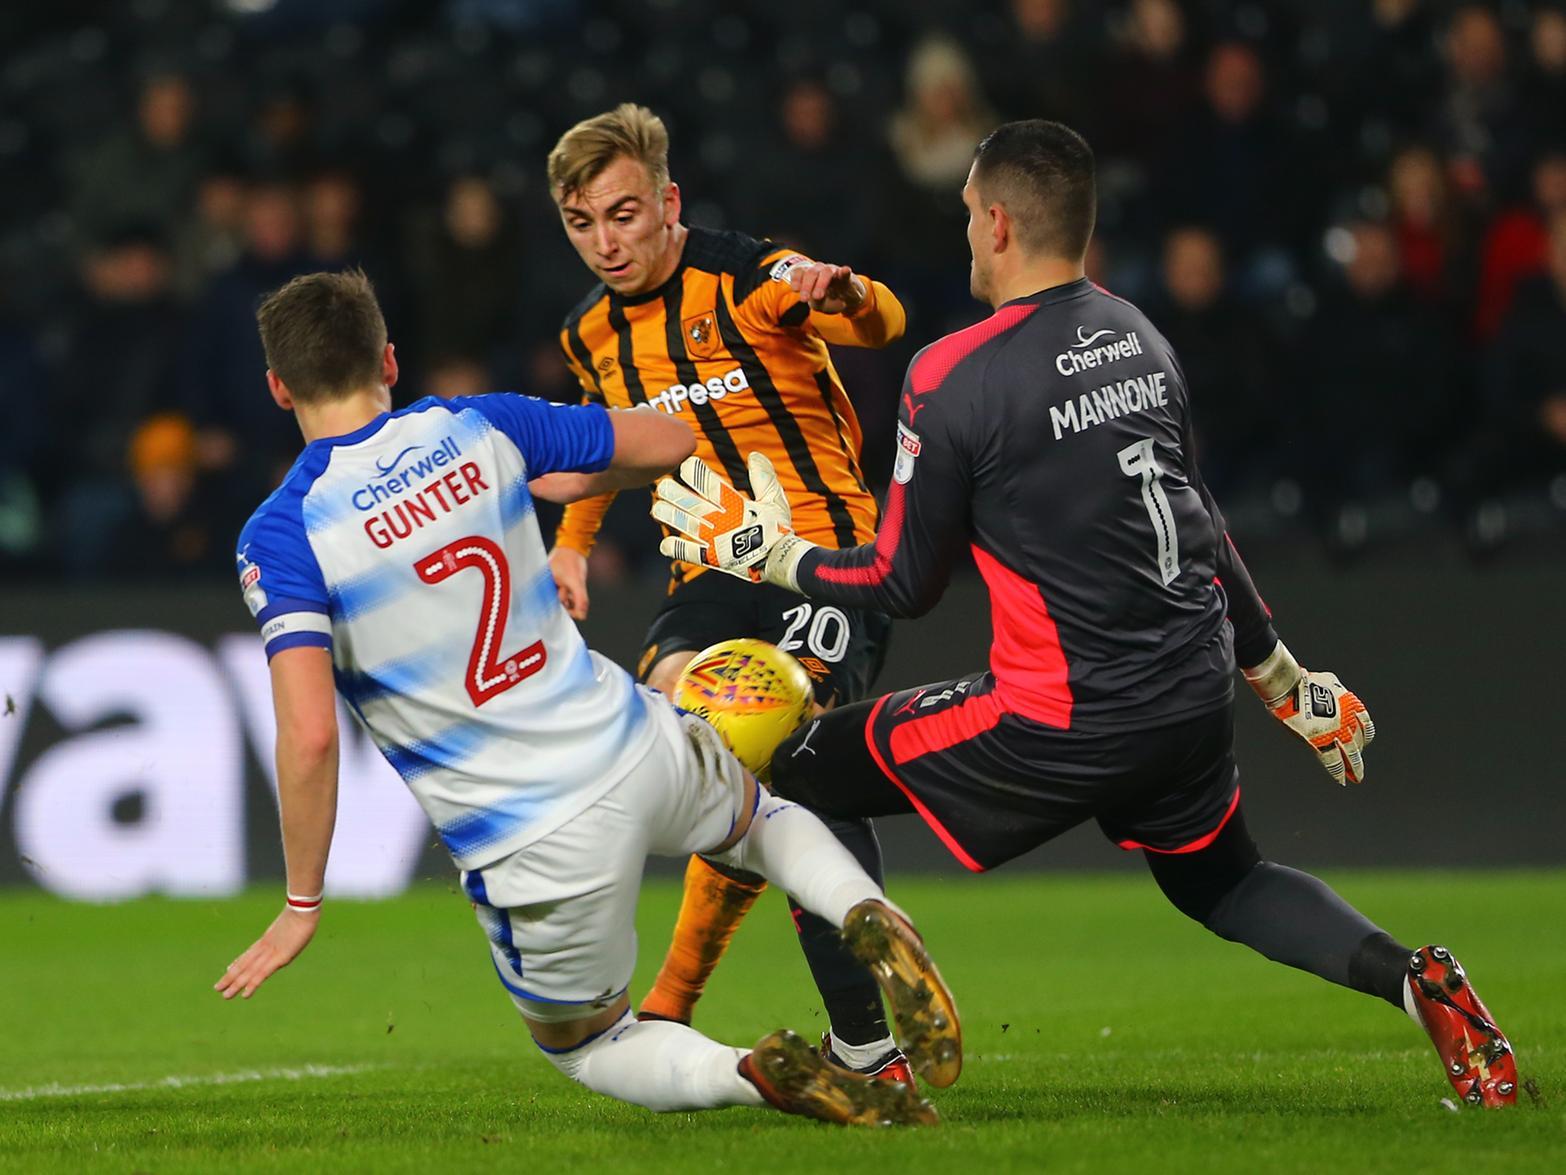 Newcastle United are said to have cooled their interest in Hull City star Jarrod Bowen, and will look to recruit more affordable options than the 20m rated winger in the January window. (Shields Gazette)